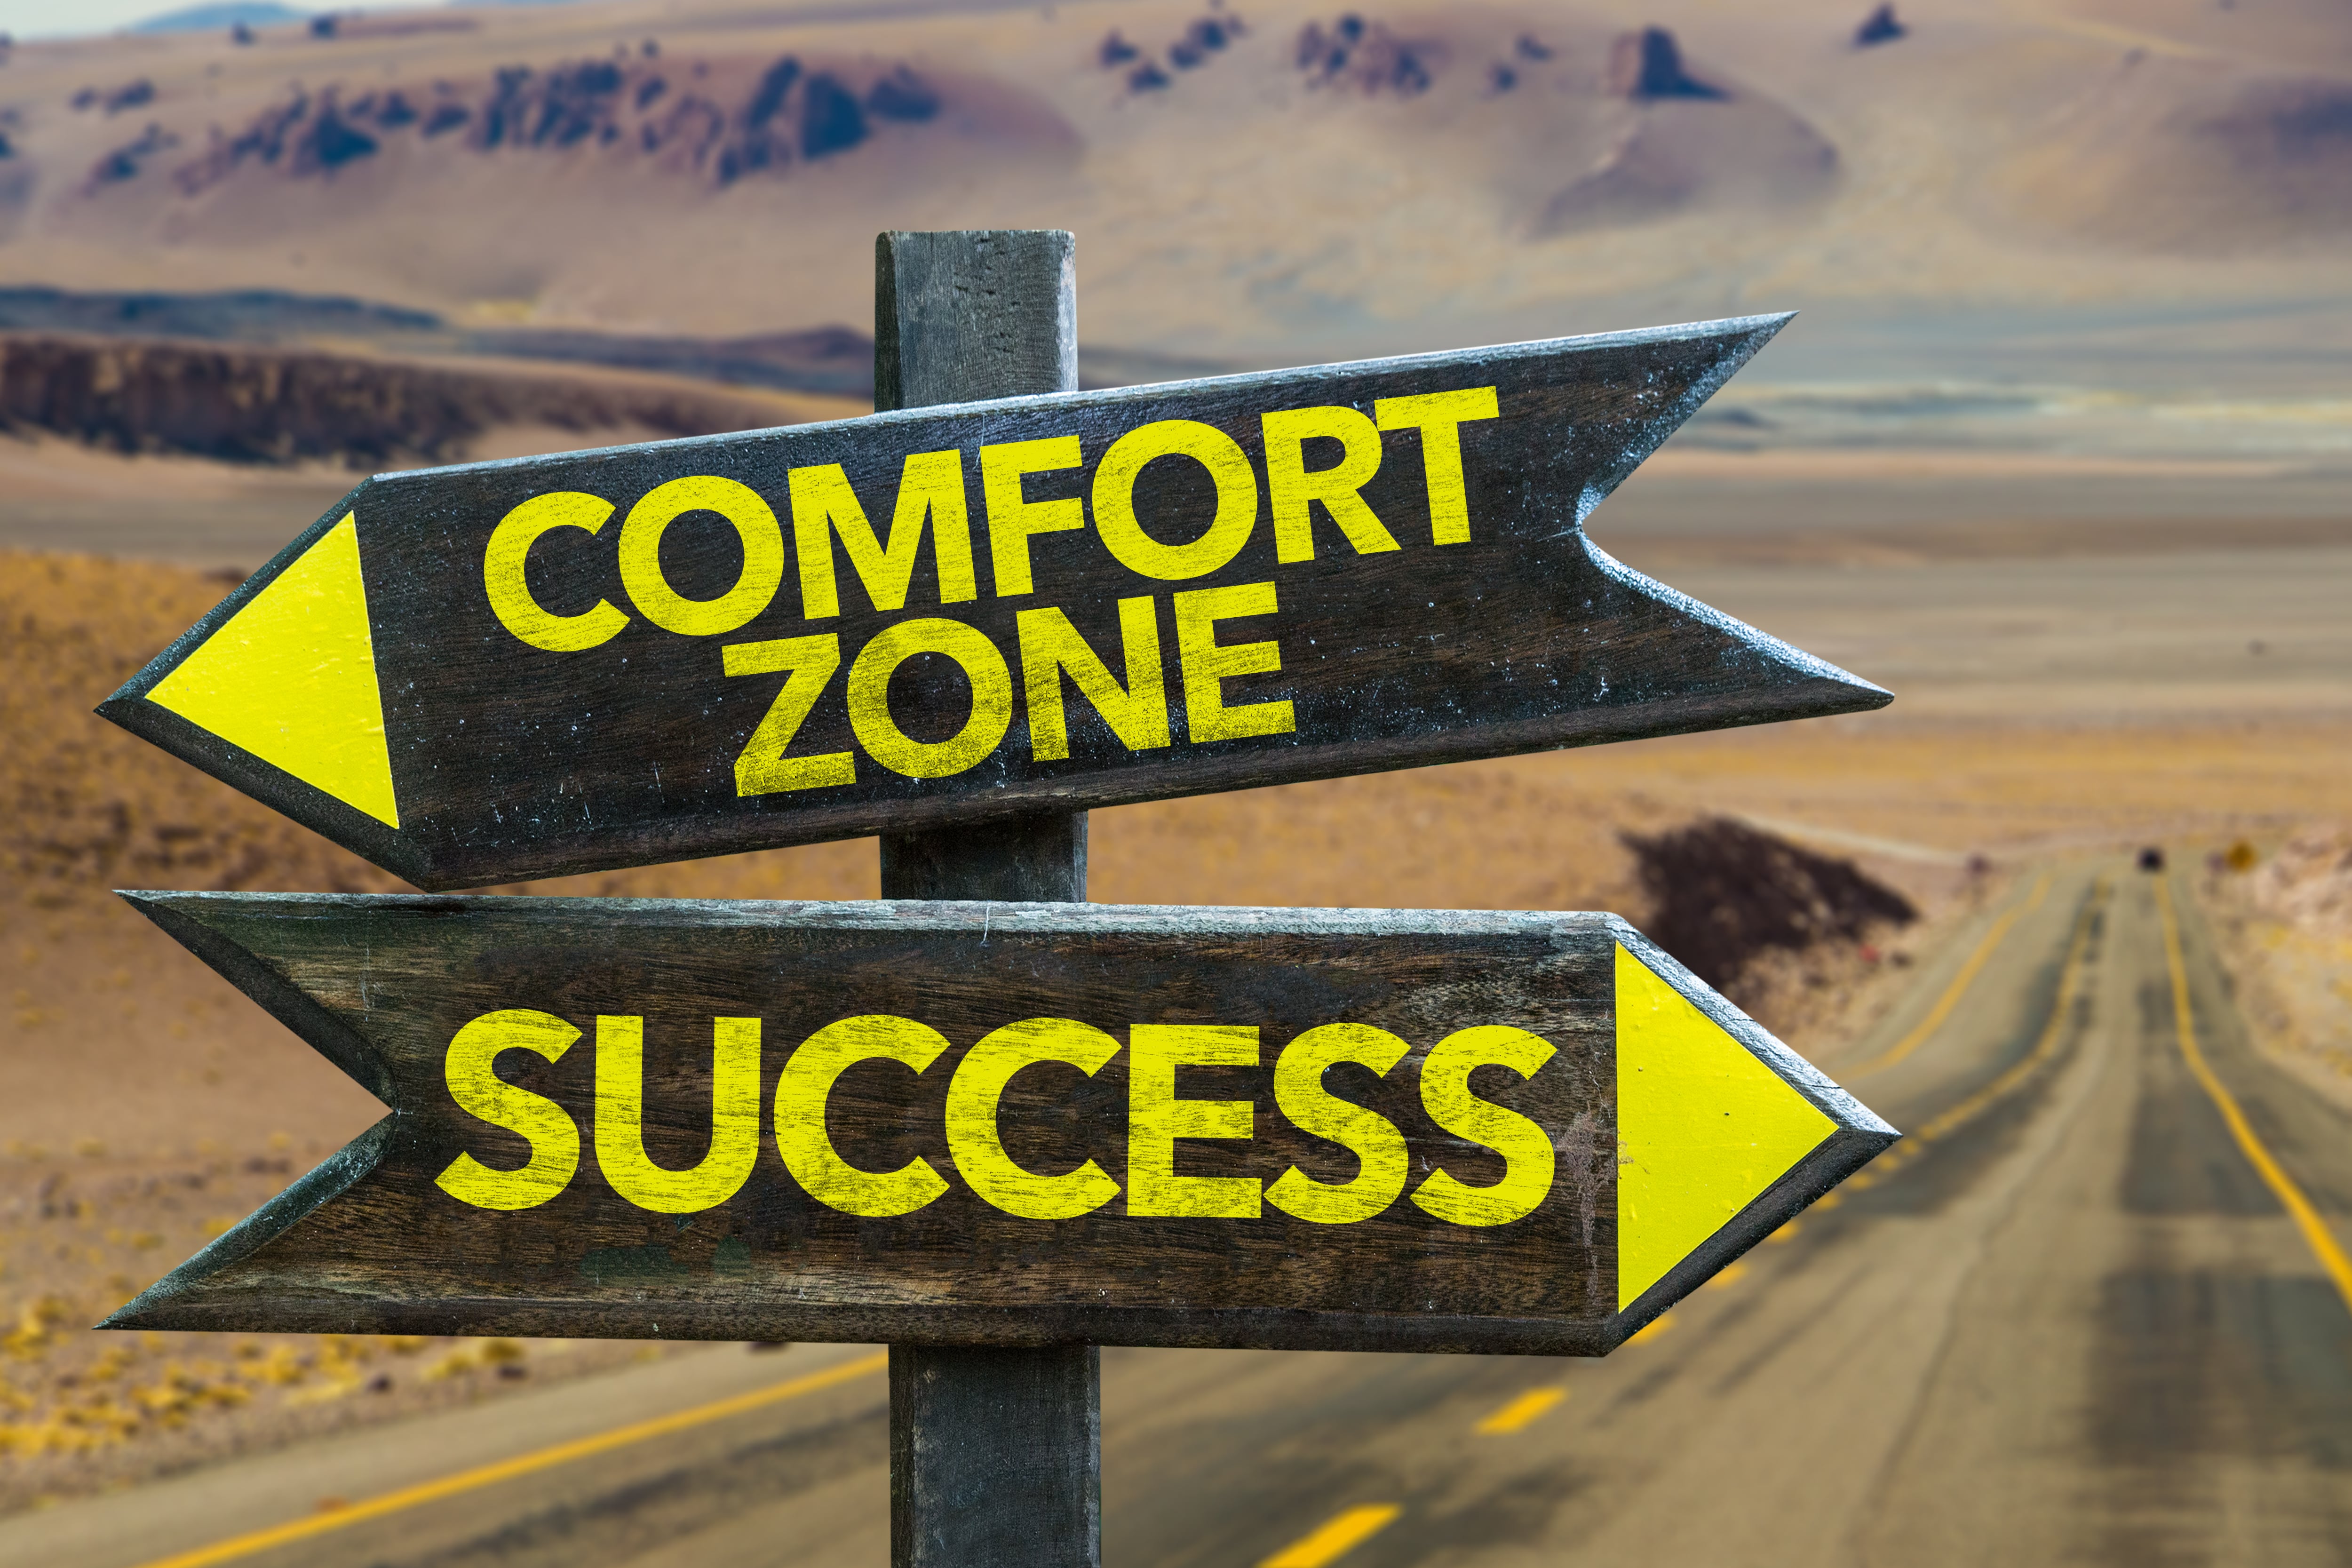 100 Comfort Zone Quotes to Push Your Personal Boundaries - Happier